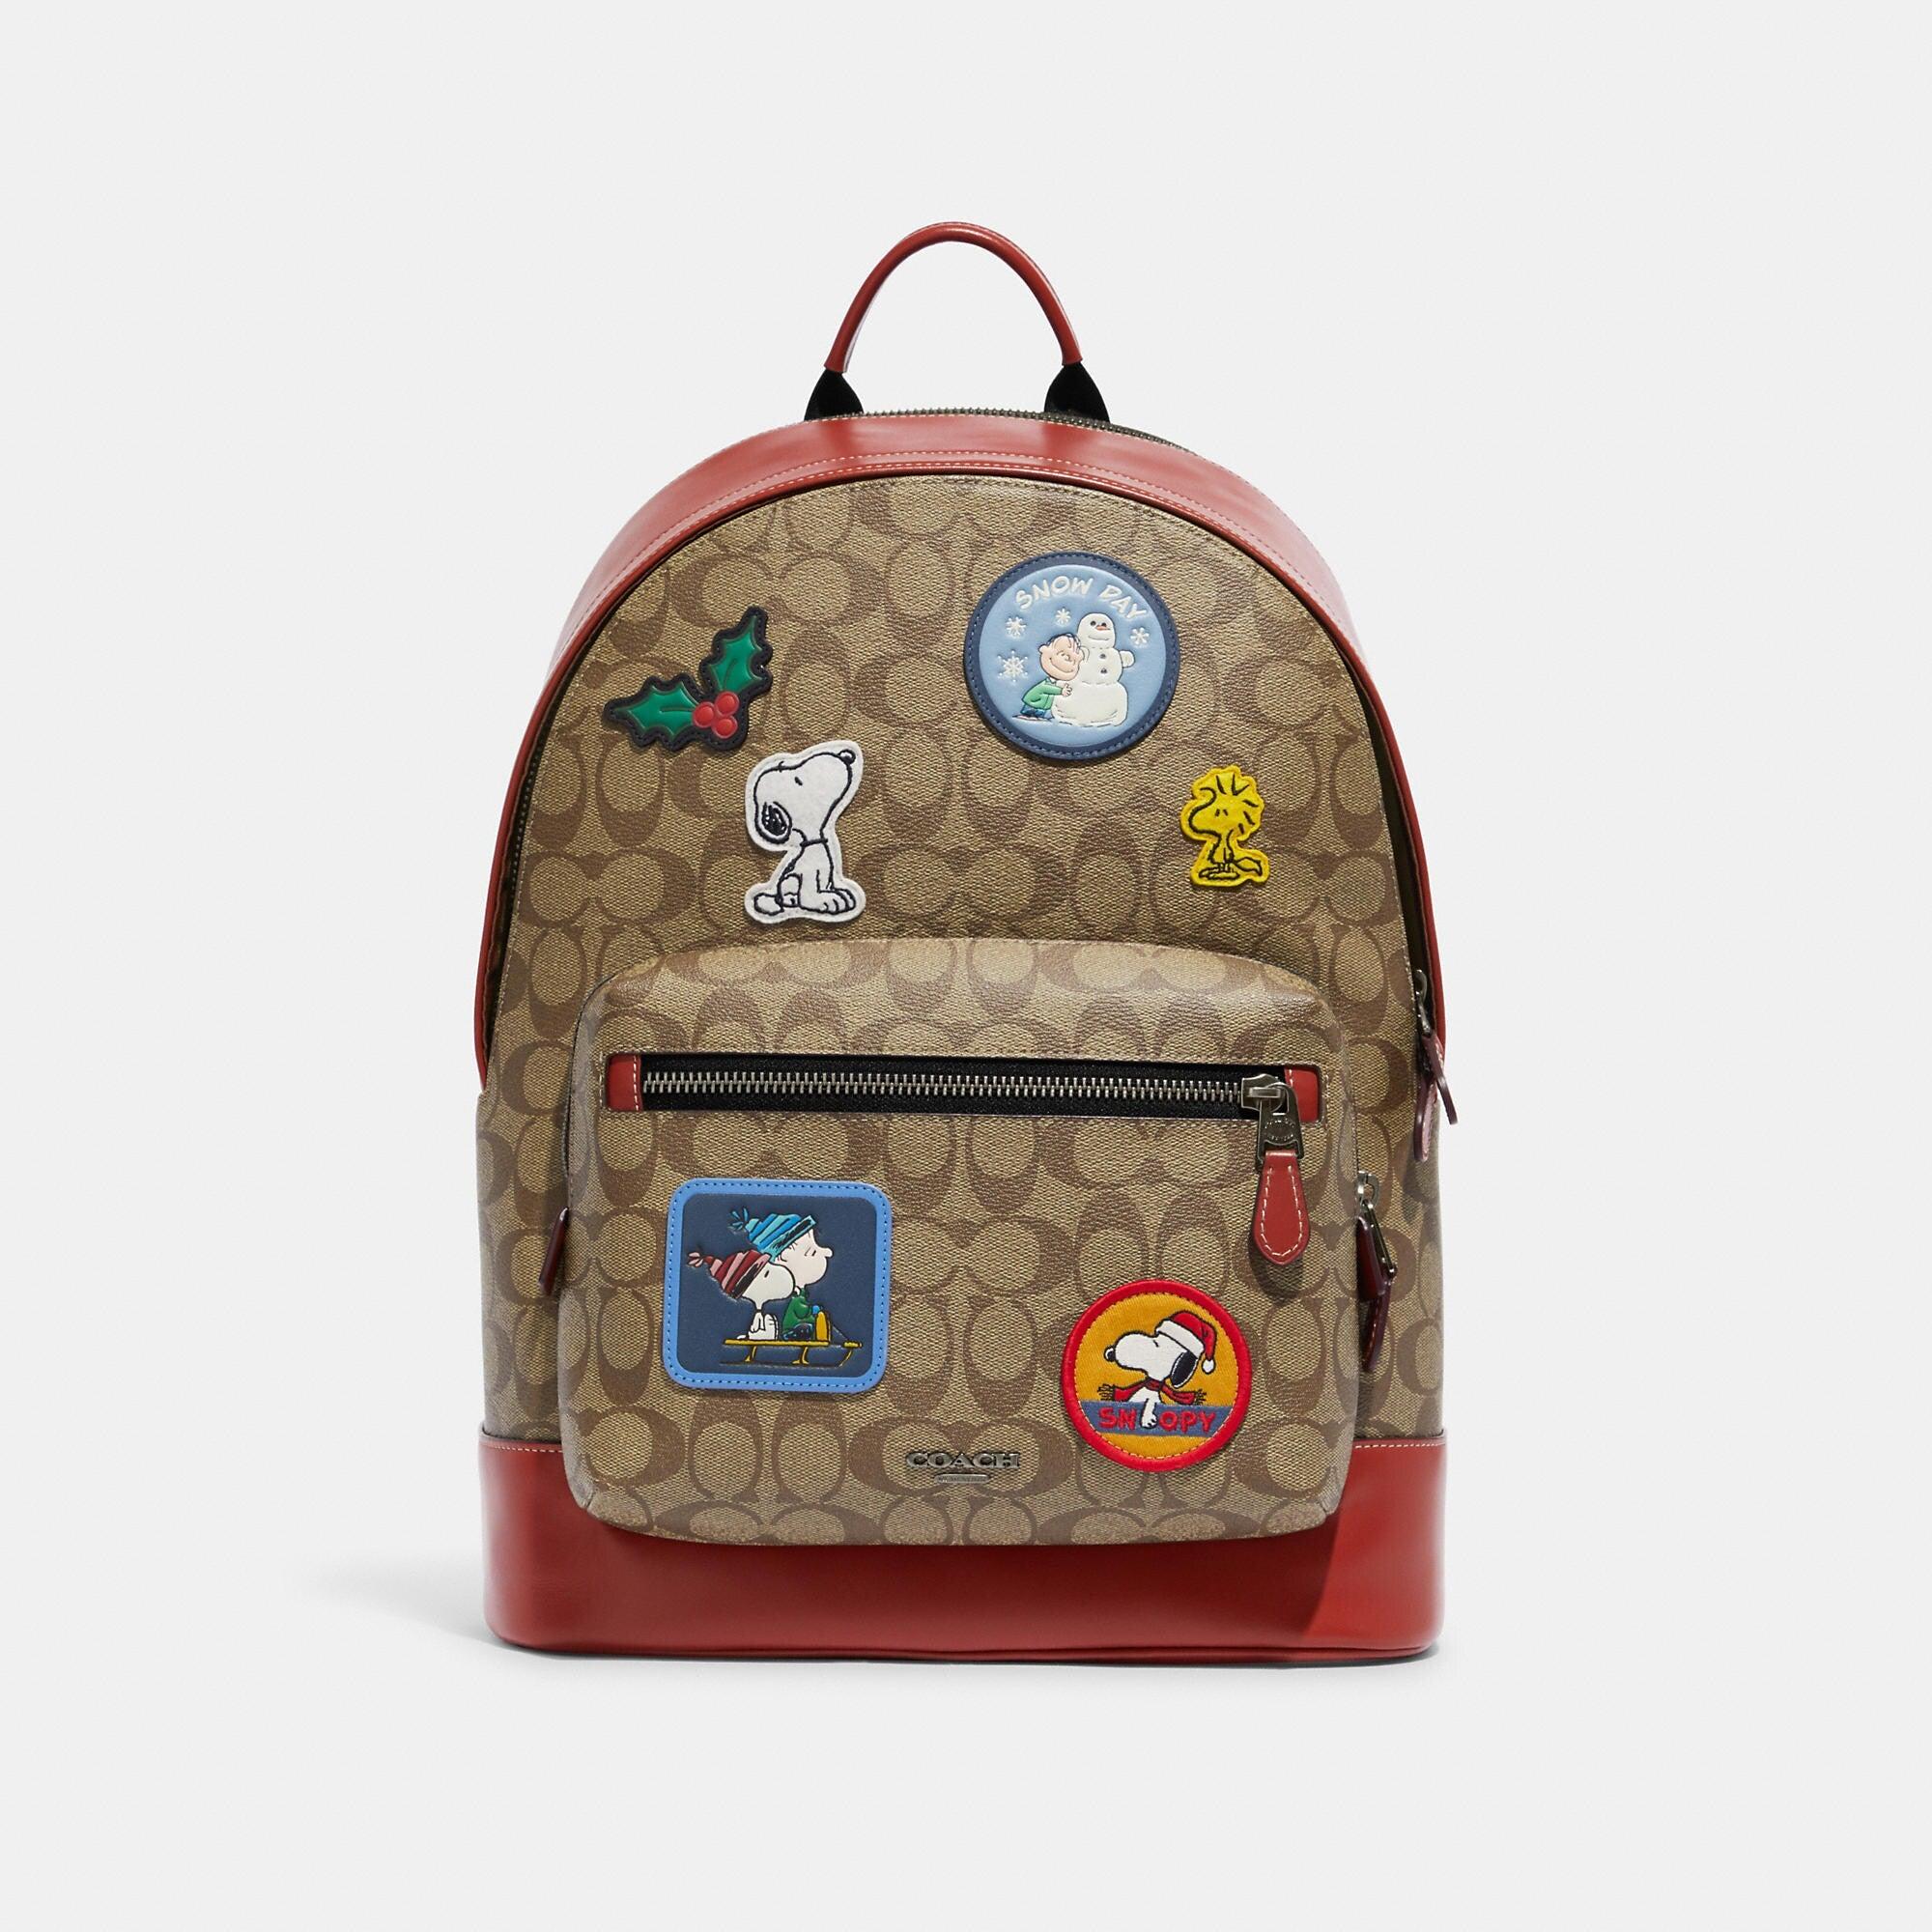 West Backpack In Signature Canvas - Mixel Shop Suggest